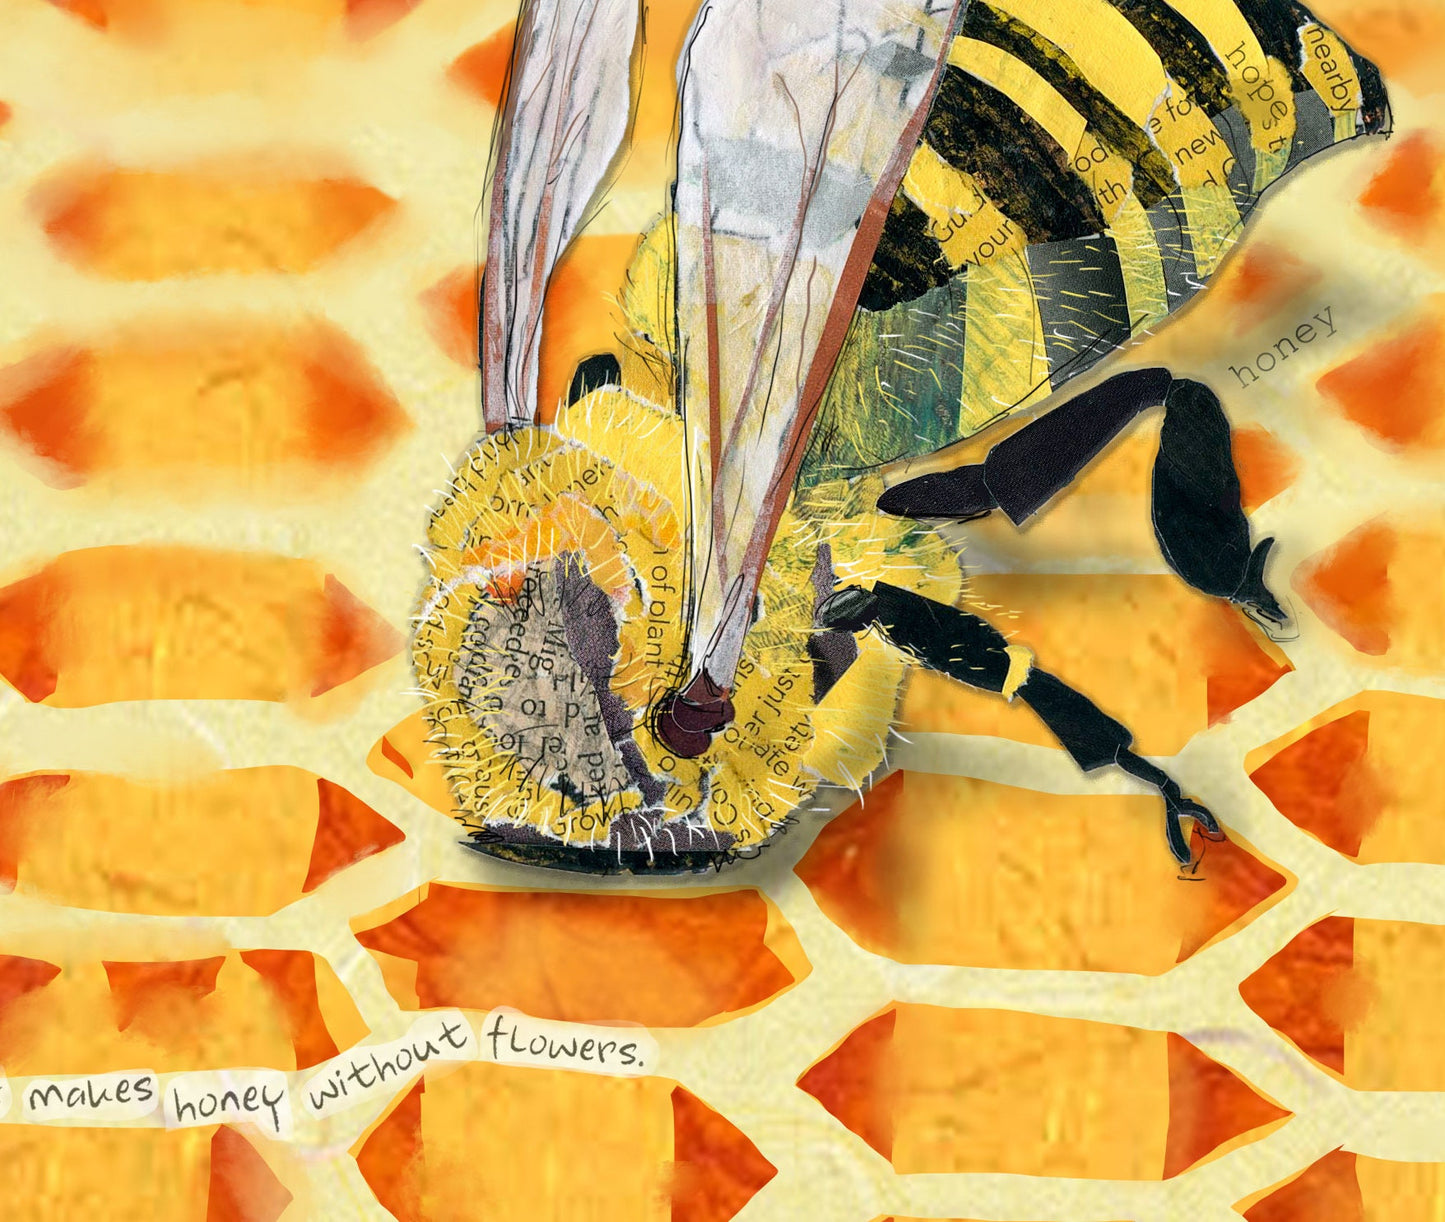 20"x16"x 1.5" Wrapped Canvas Print of a mixed media collage of a honeybee with its head deep inside a honey comb cell, inspirational quote